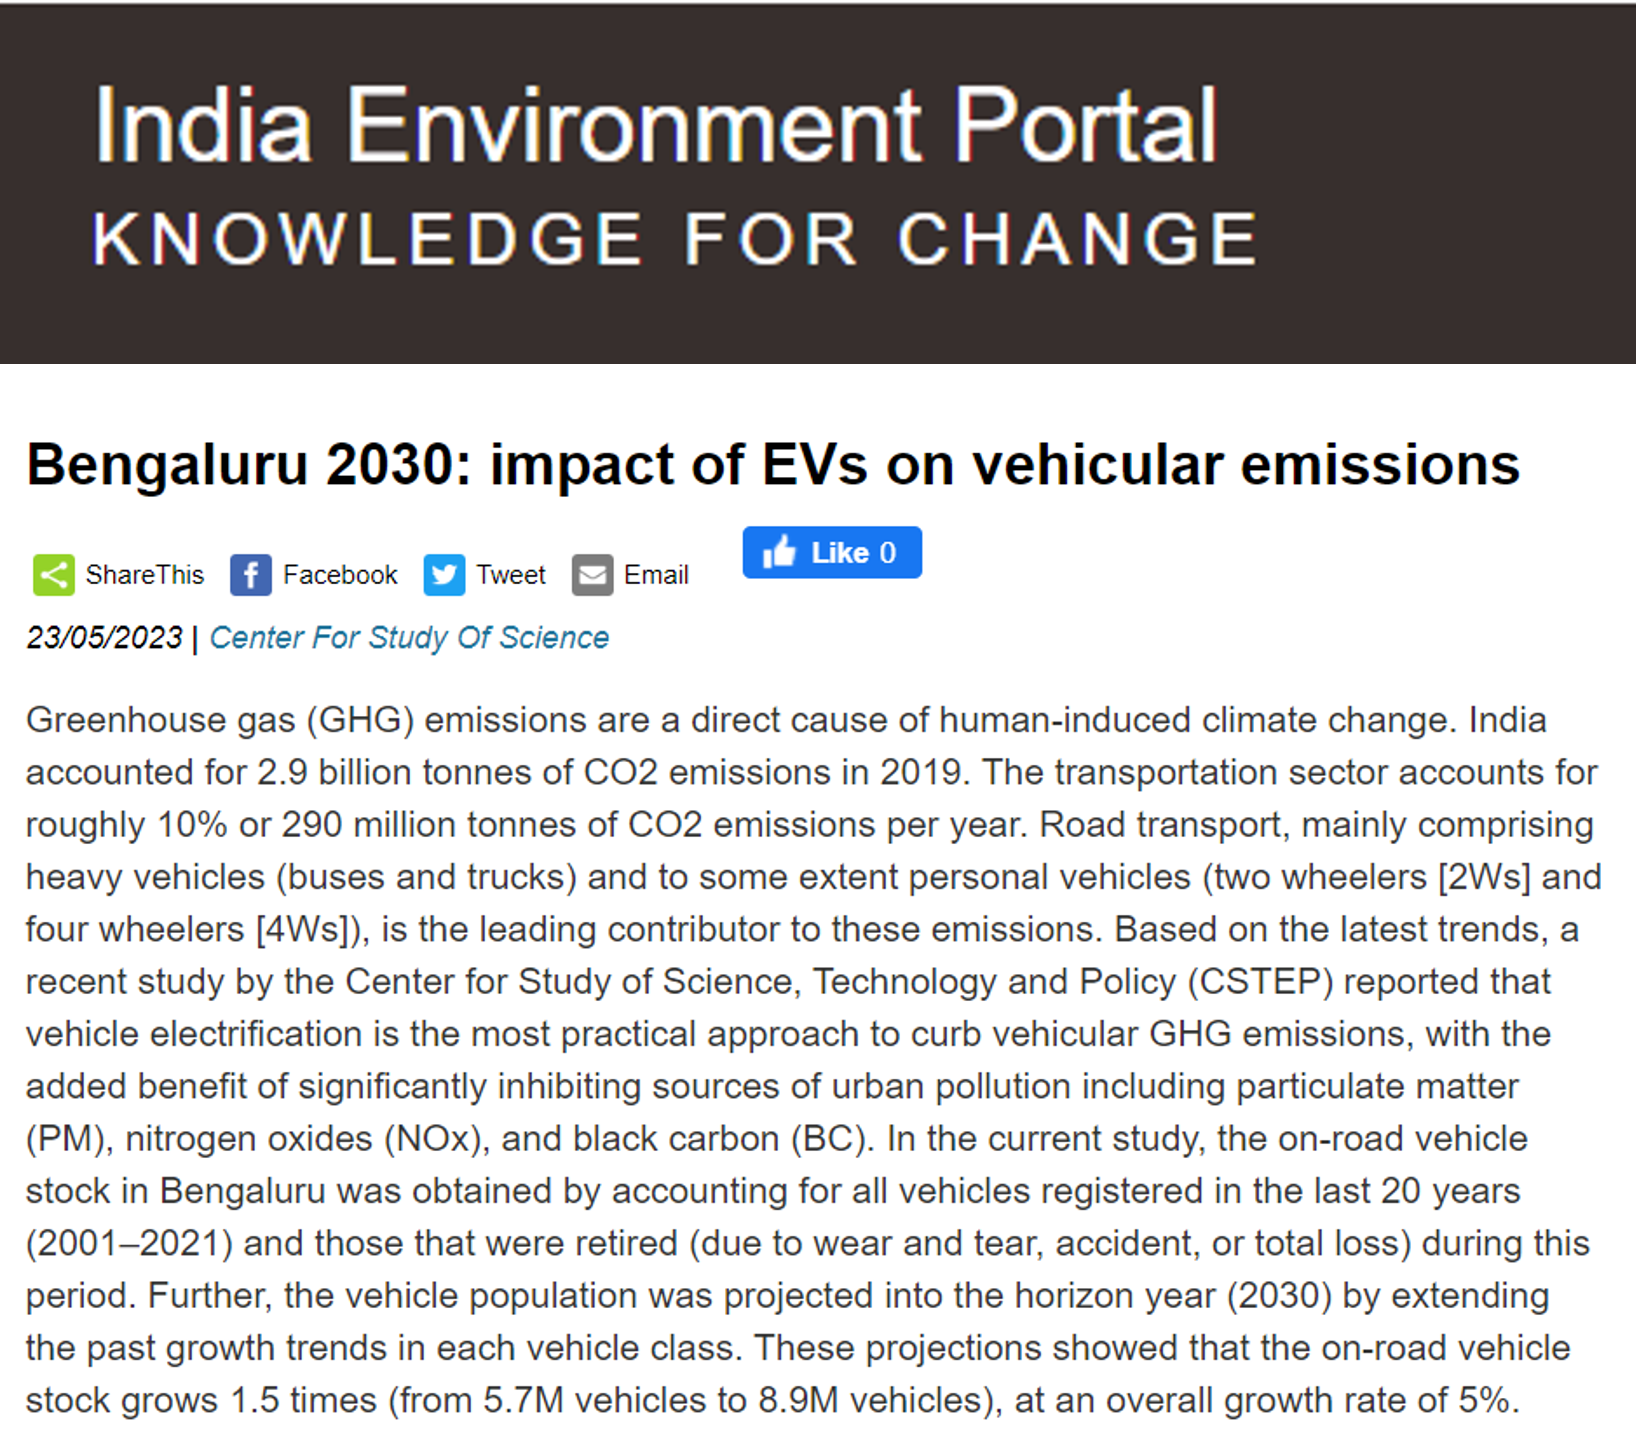 CSTEP’s study on the impact of electric vehicles on vehicular emissions in Bengaluru covered by India Environment Portal